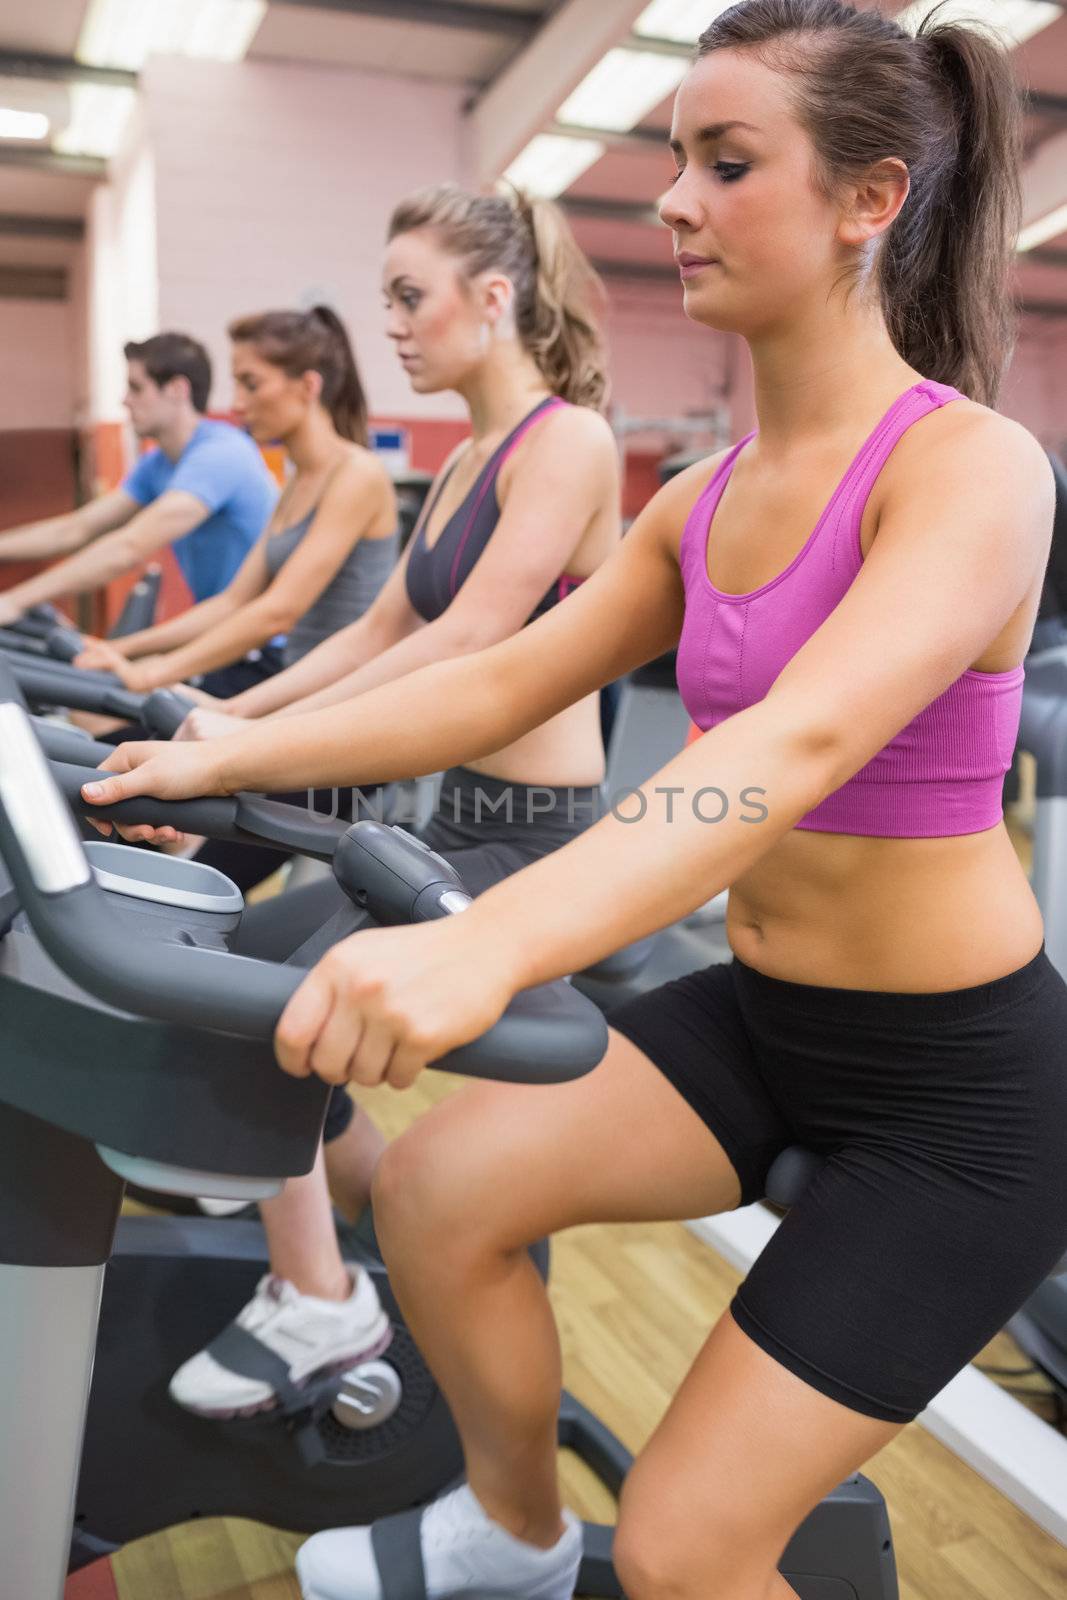 Group of people on exercise bicycles by Wavebreakmedia